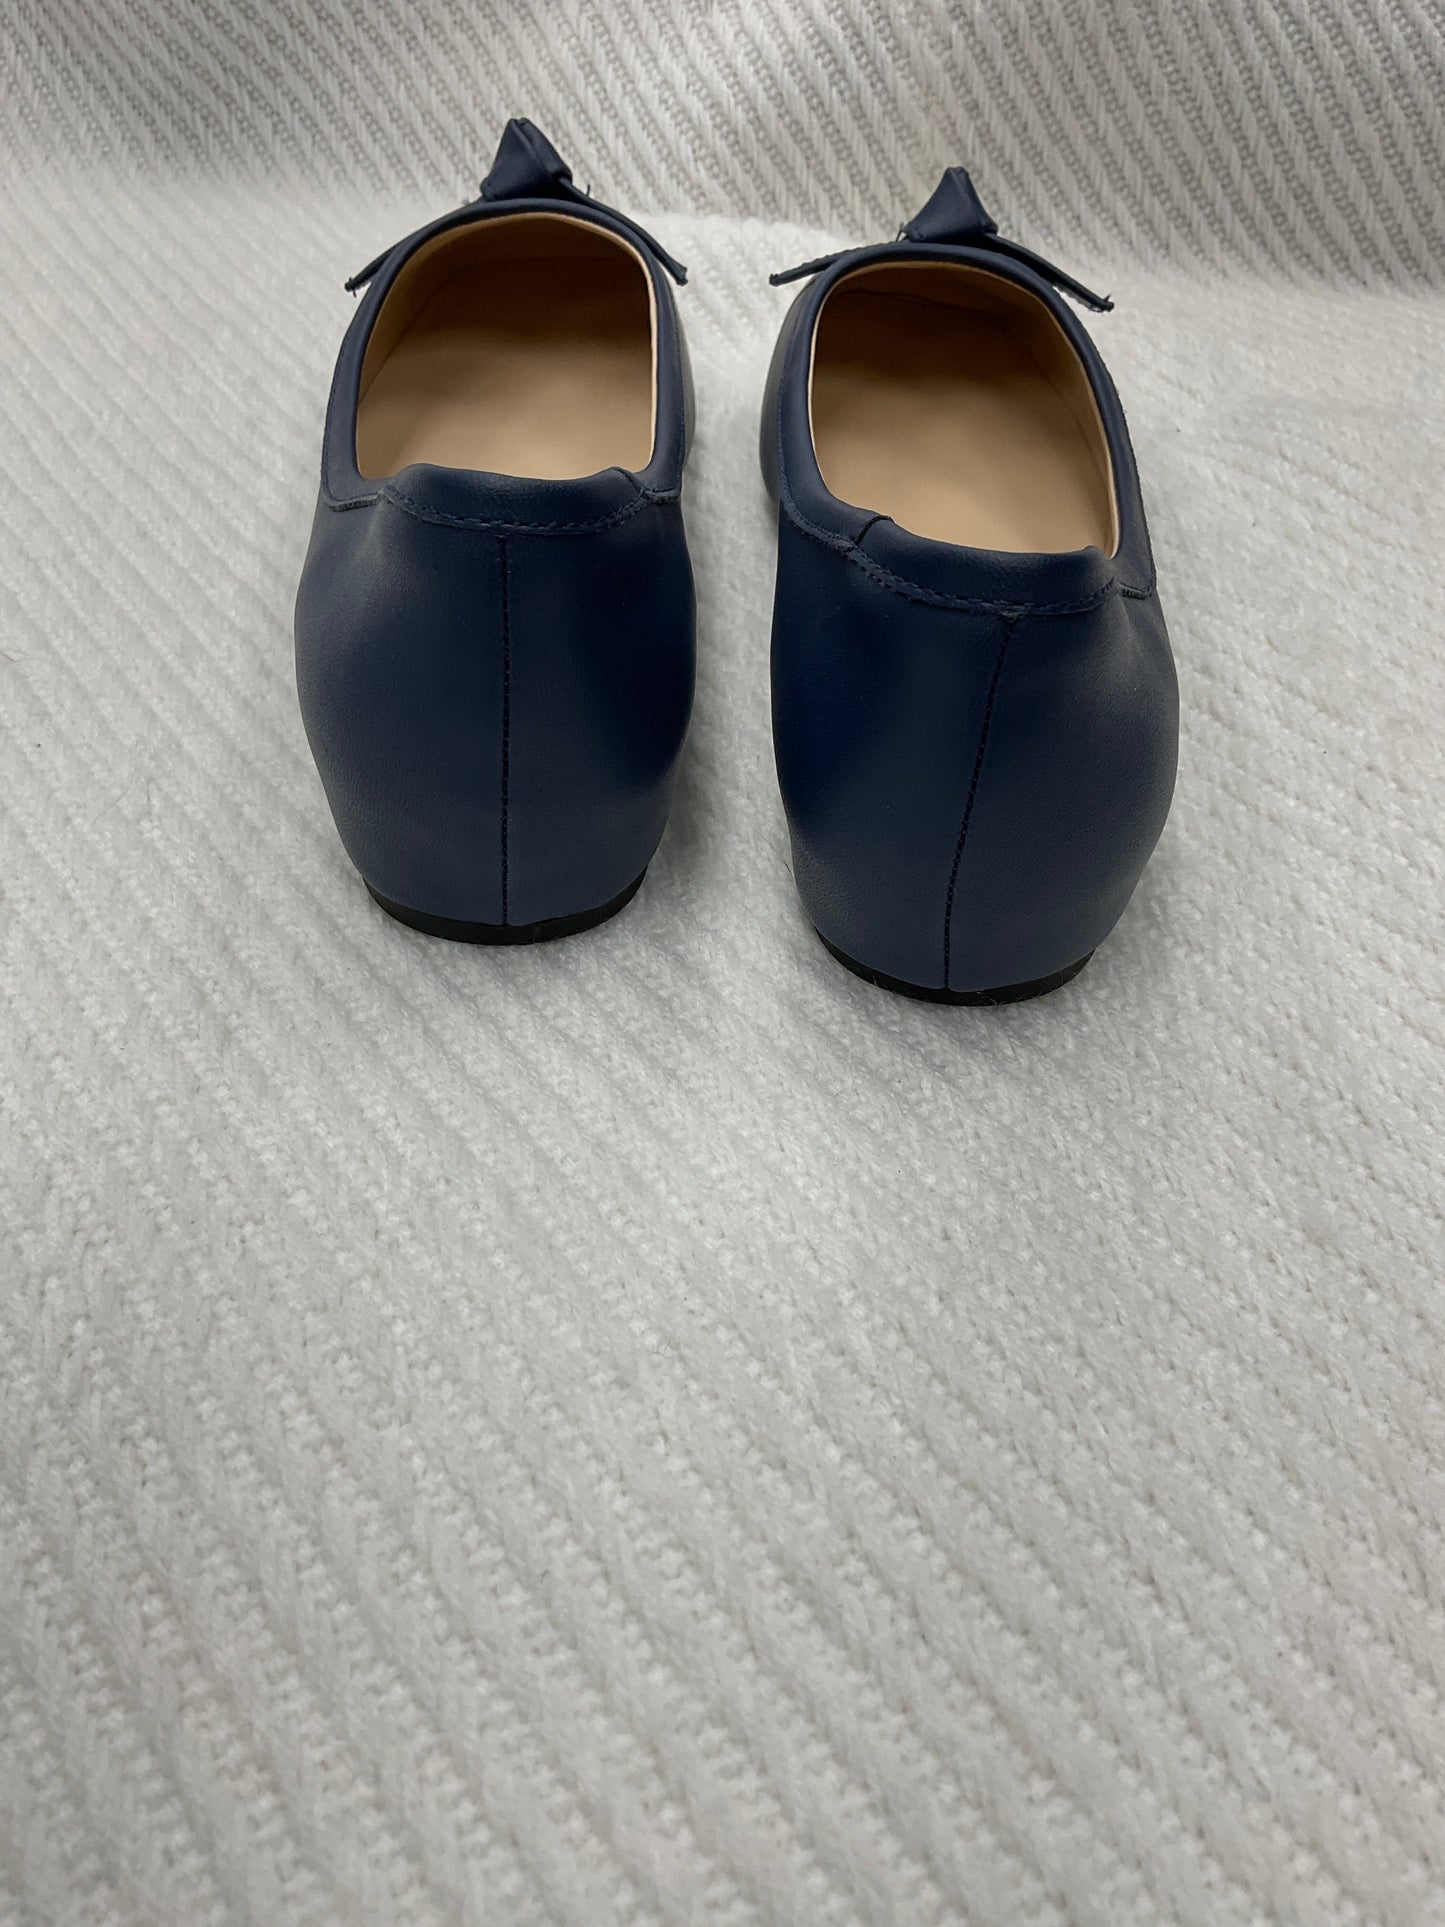 Shoes Flats By Clothes Mentor  Size: 6